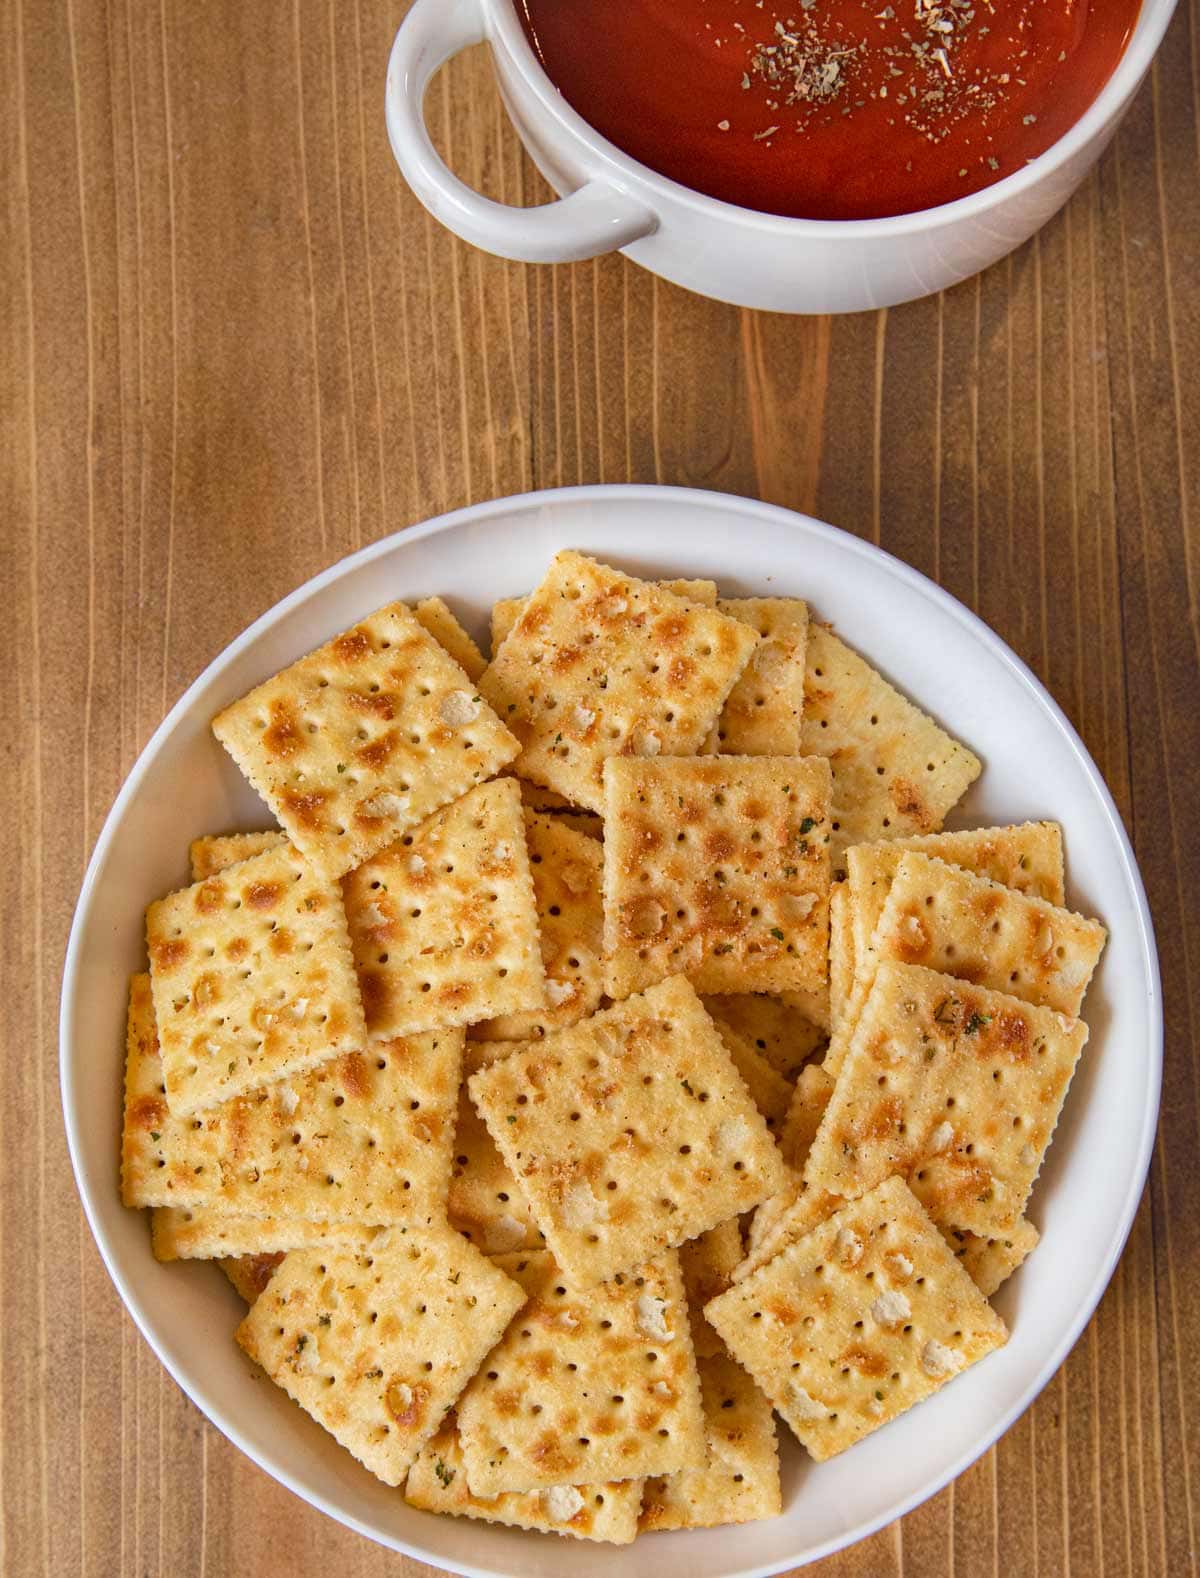 Ranch Mix Saltines in bowl served with tomato soup